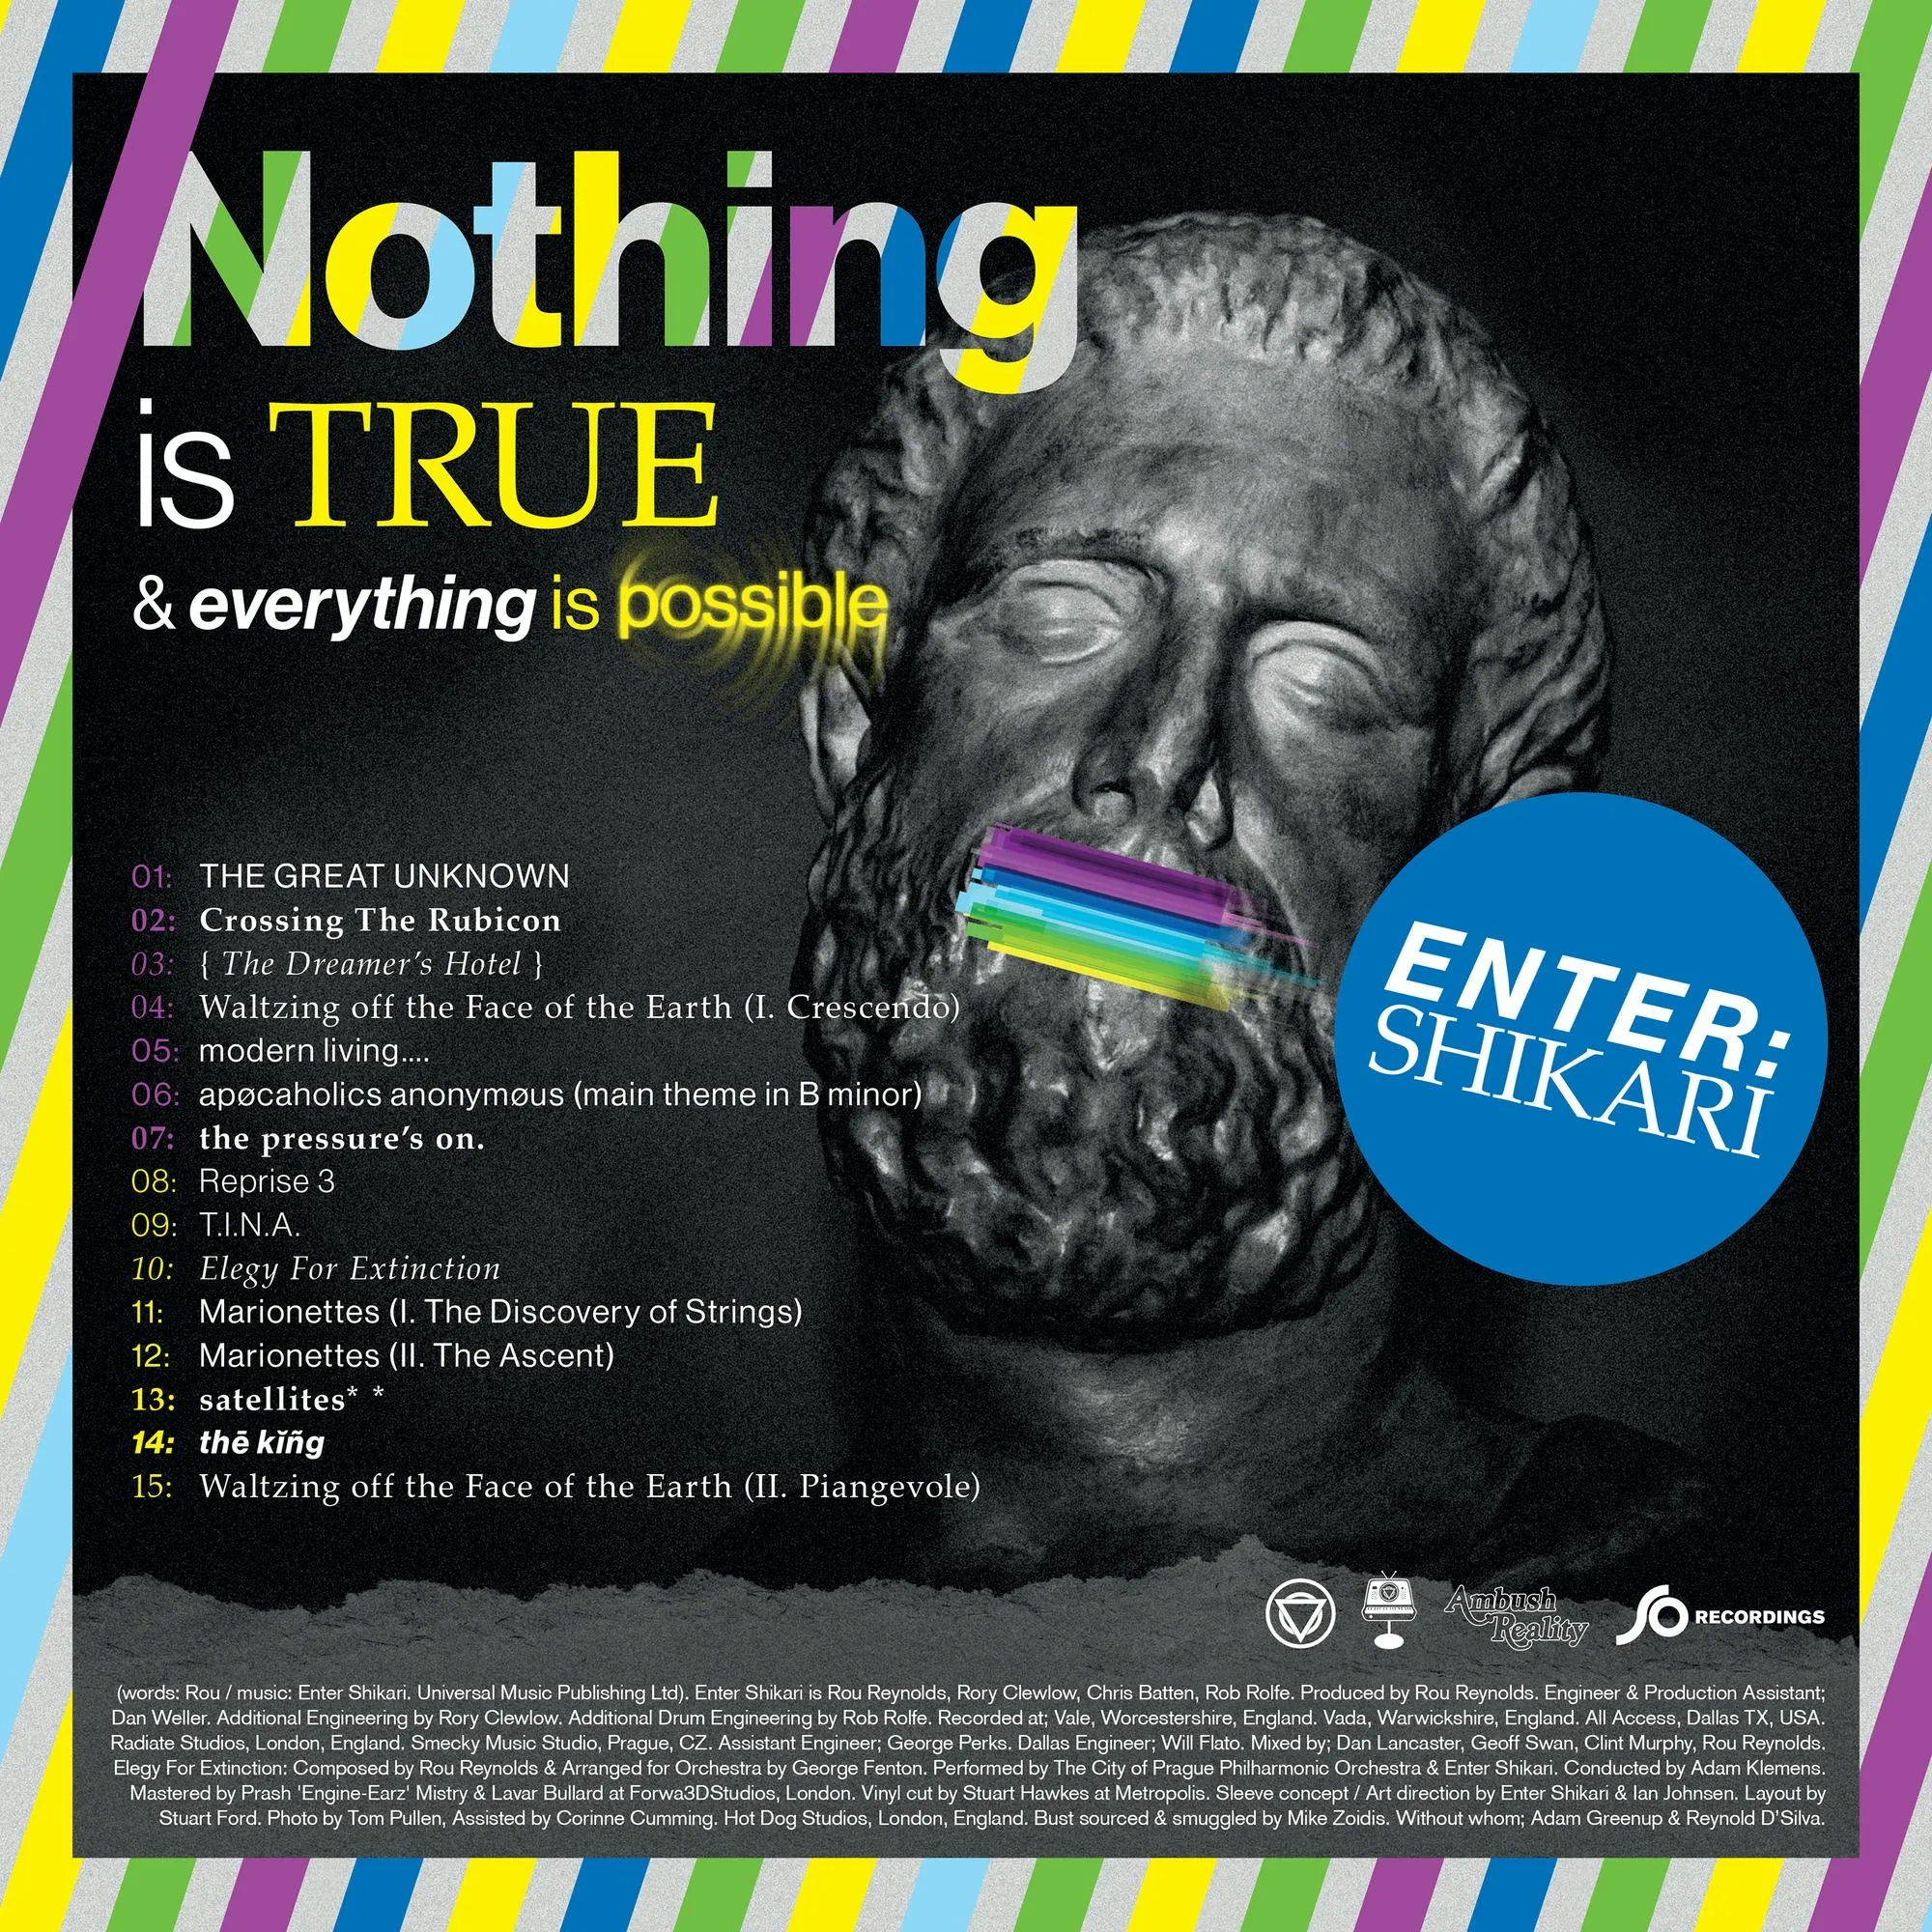 Album artwork for Album artwork for Nothing Is True and Everything Is Possible by Enter Shikari by Nothing Is True and Everything Is Possible - Enter Shikari